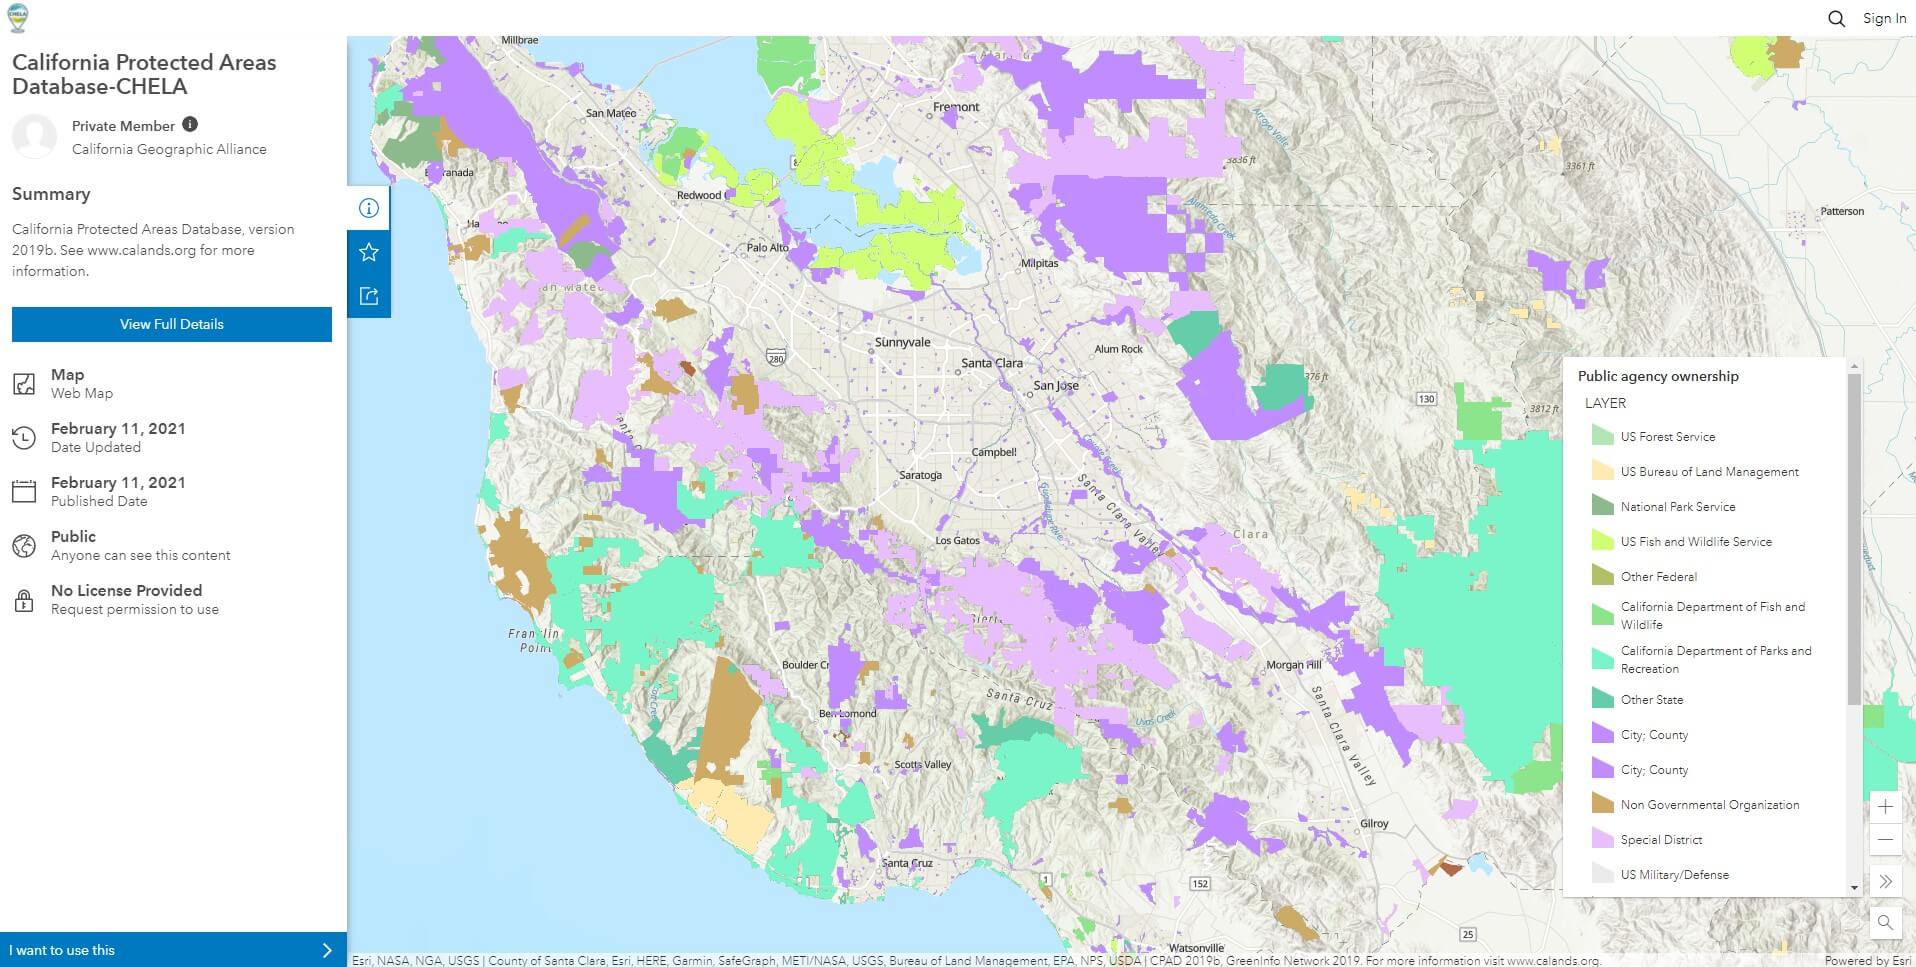 California Protected Areas Database image